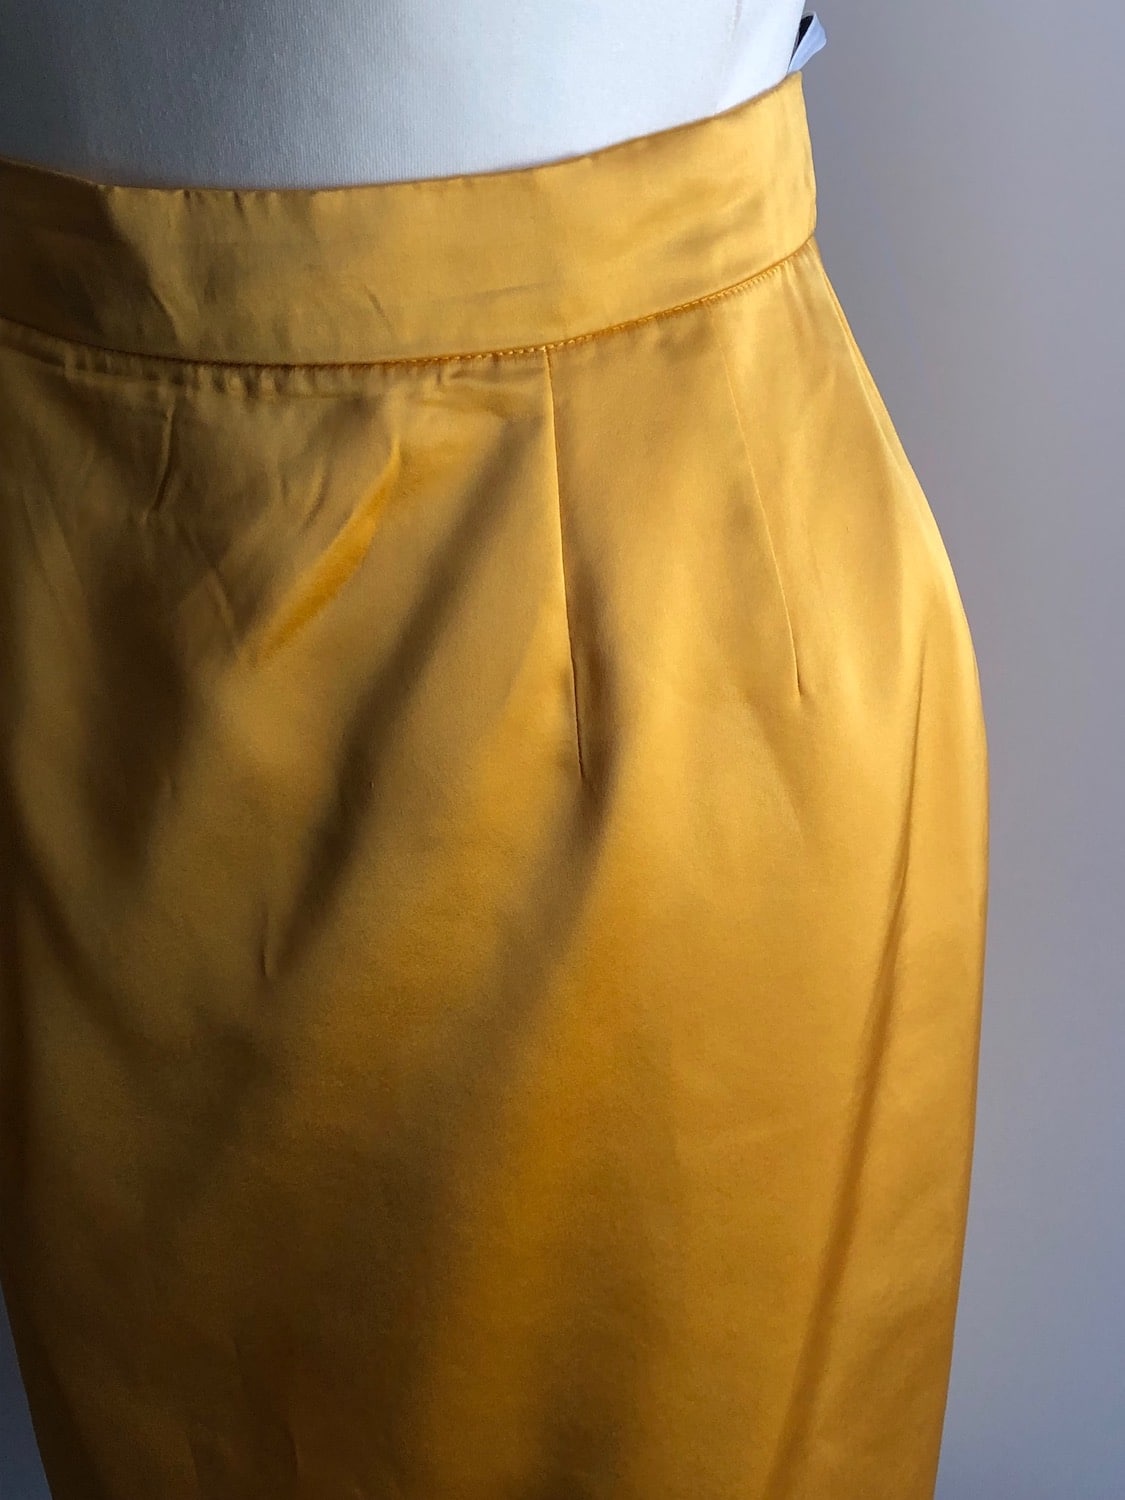 YVES SAINT LAURENT Variation Vintage Gold-Yellow Fitted Skirt C.1980s